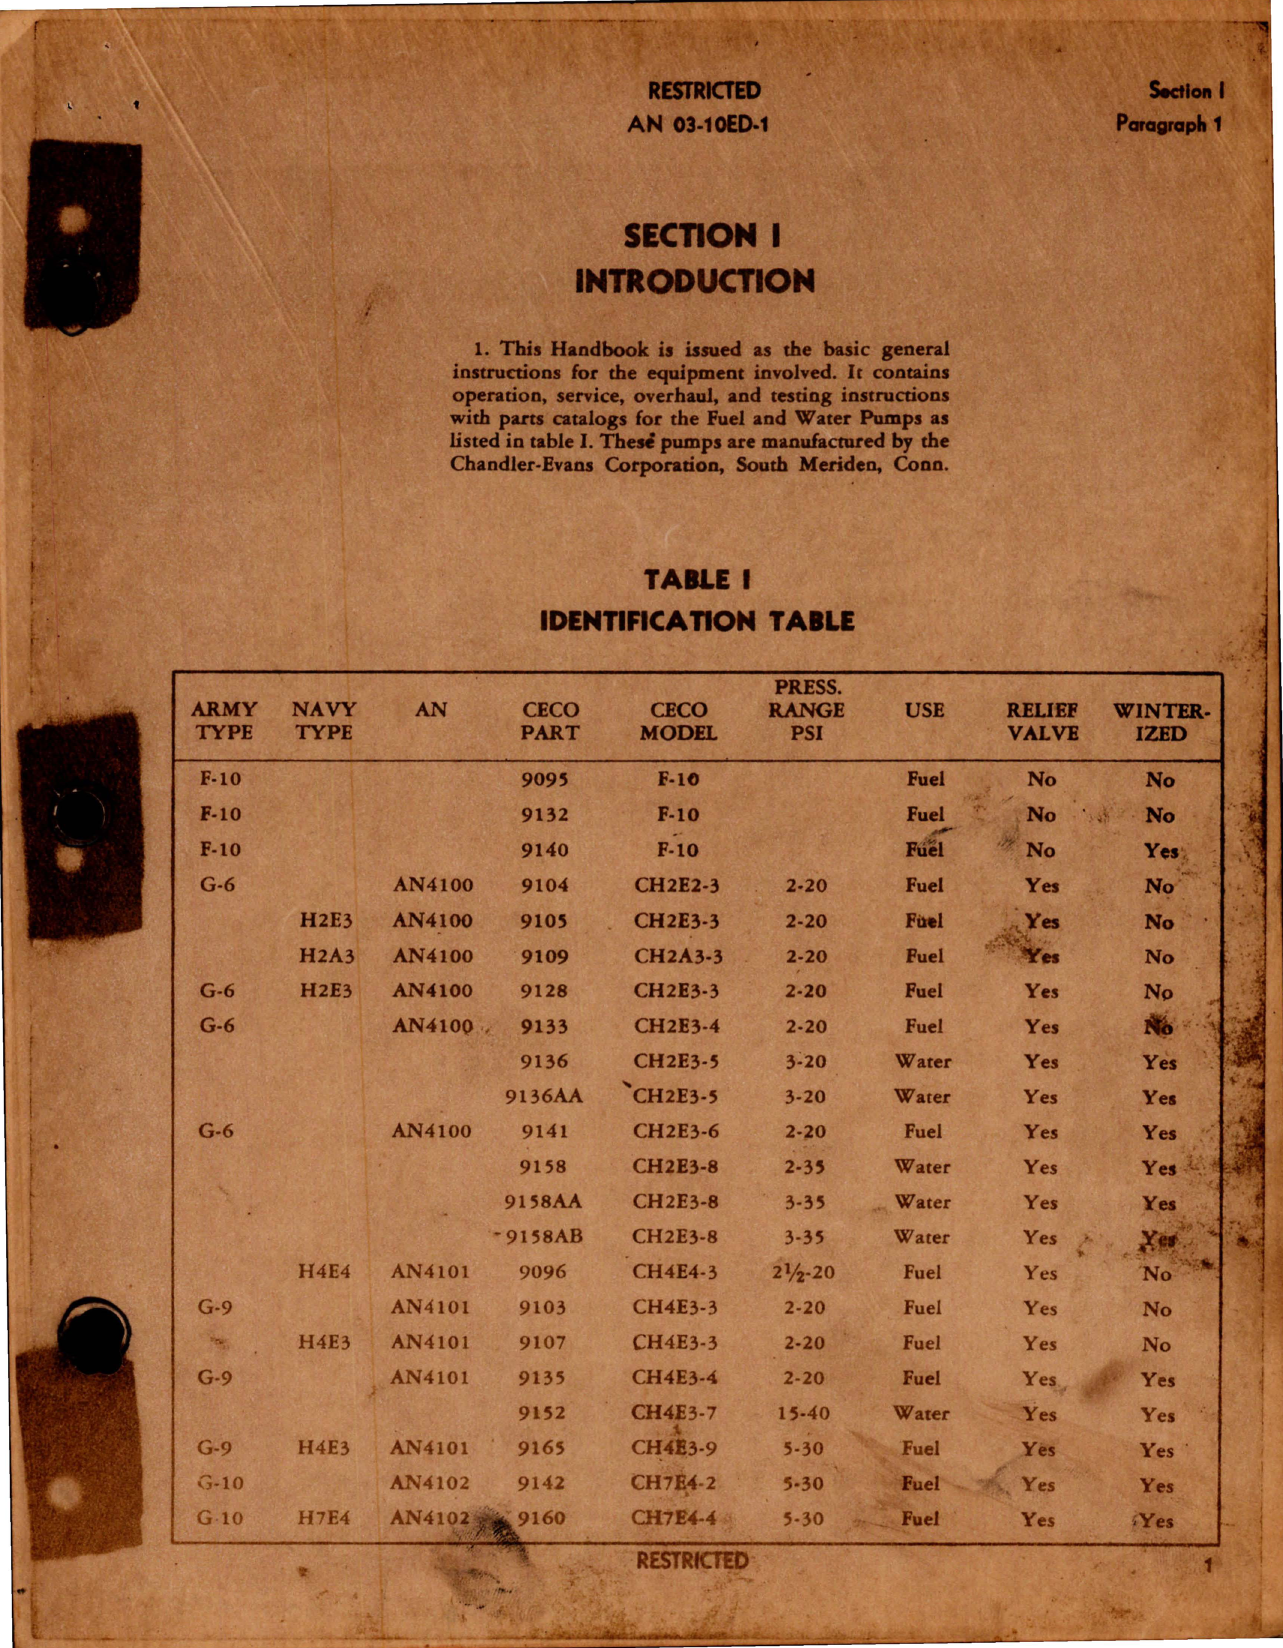 Sample page 9 from AirCorps Library document: Instructions with Parts for Engine-Driven Fuel and Water Pumps - Types F-10, G-6, G-9 and G-10 